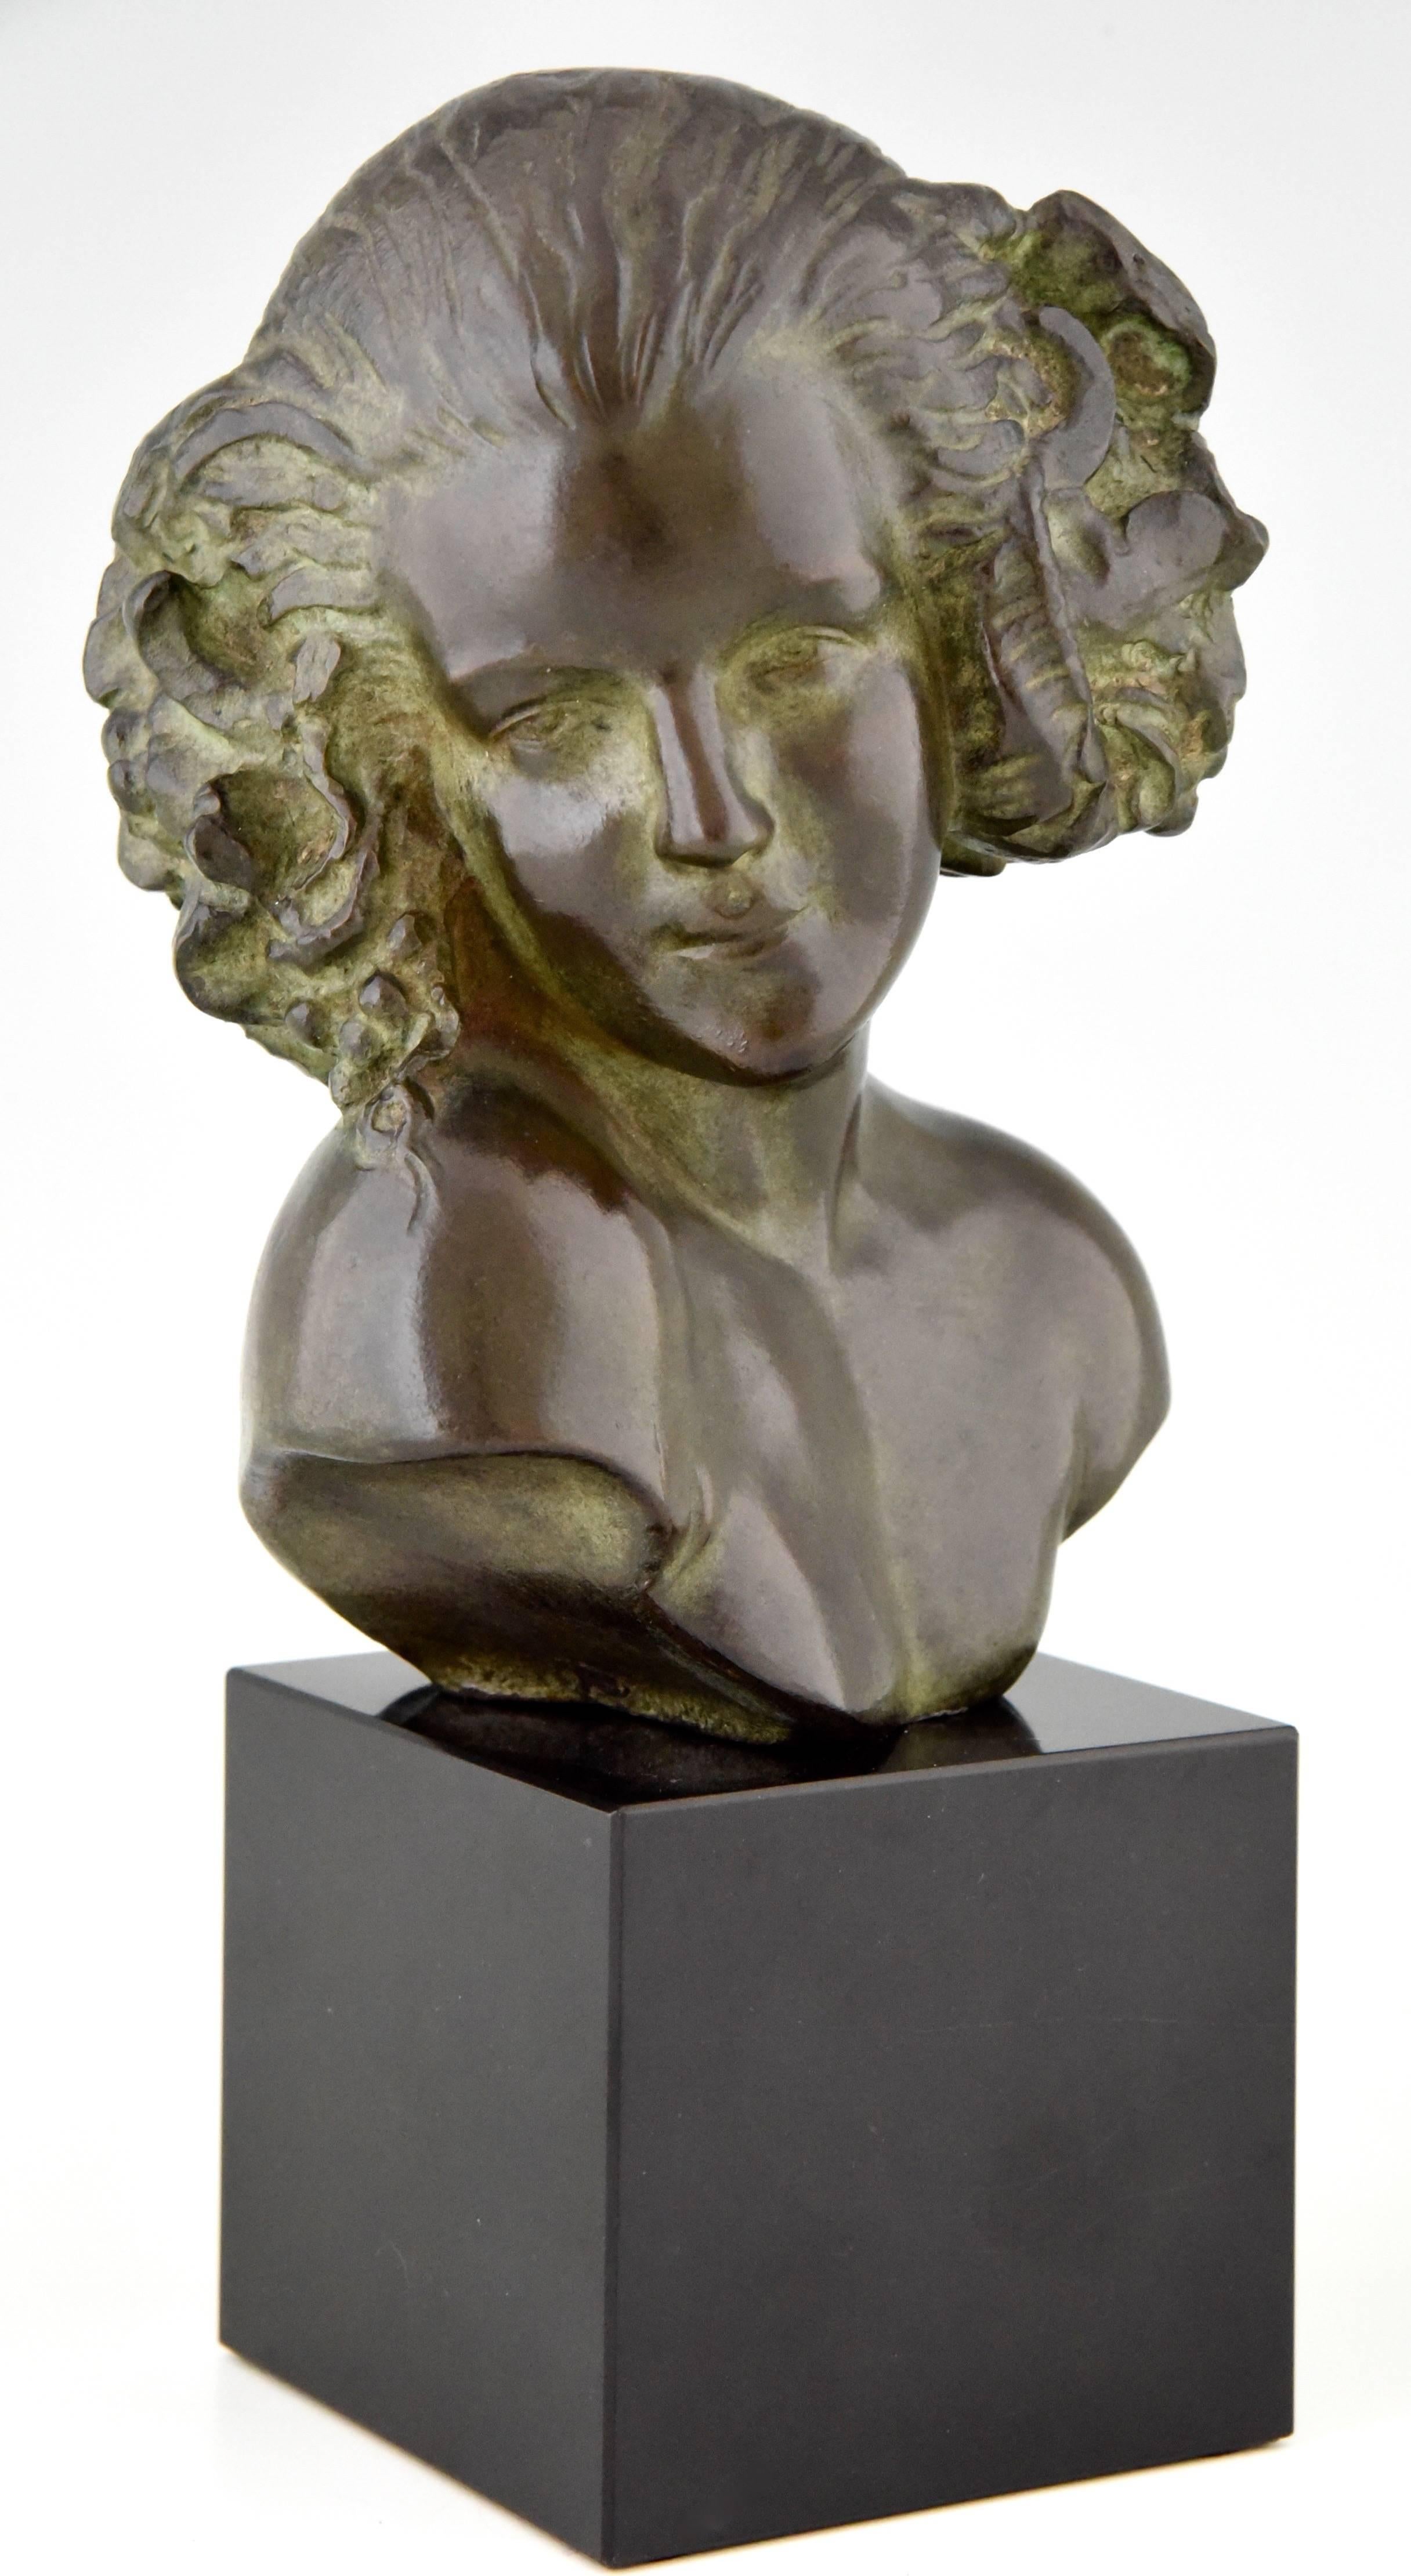 Art Deco bust of a female satyr by Maxime Real del Sarte, 1888-1954.
Signature:  Real del Sarte. 
Style:  Art deco
Date:  circa 1930.
Material:  Dark green patinated bronze. Marble base. 
Origin:  France.
Size:  
H. 10.4 inch x L. 5.3 inch x